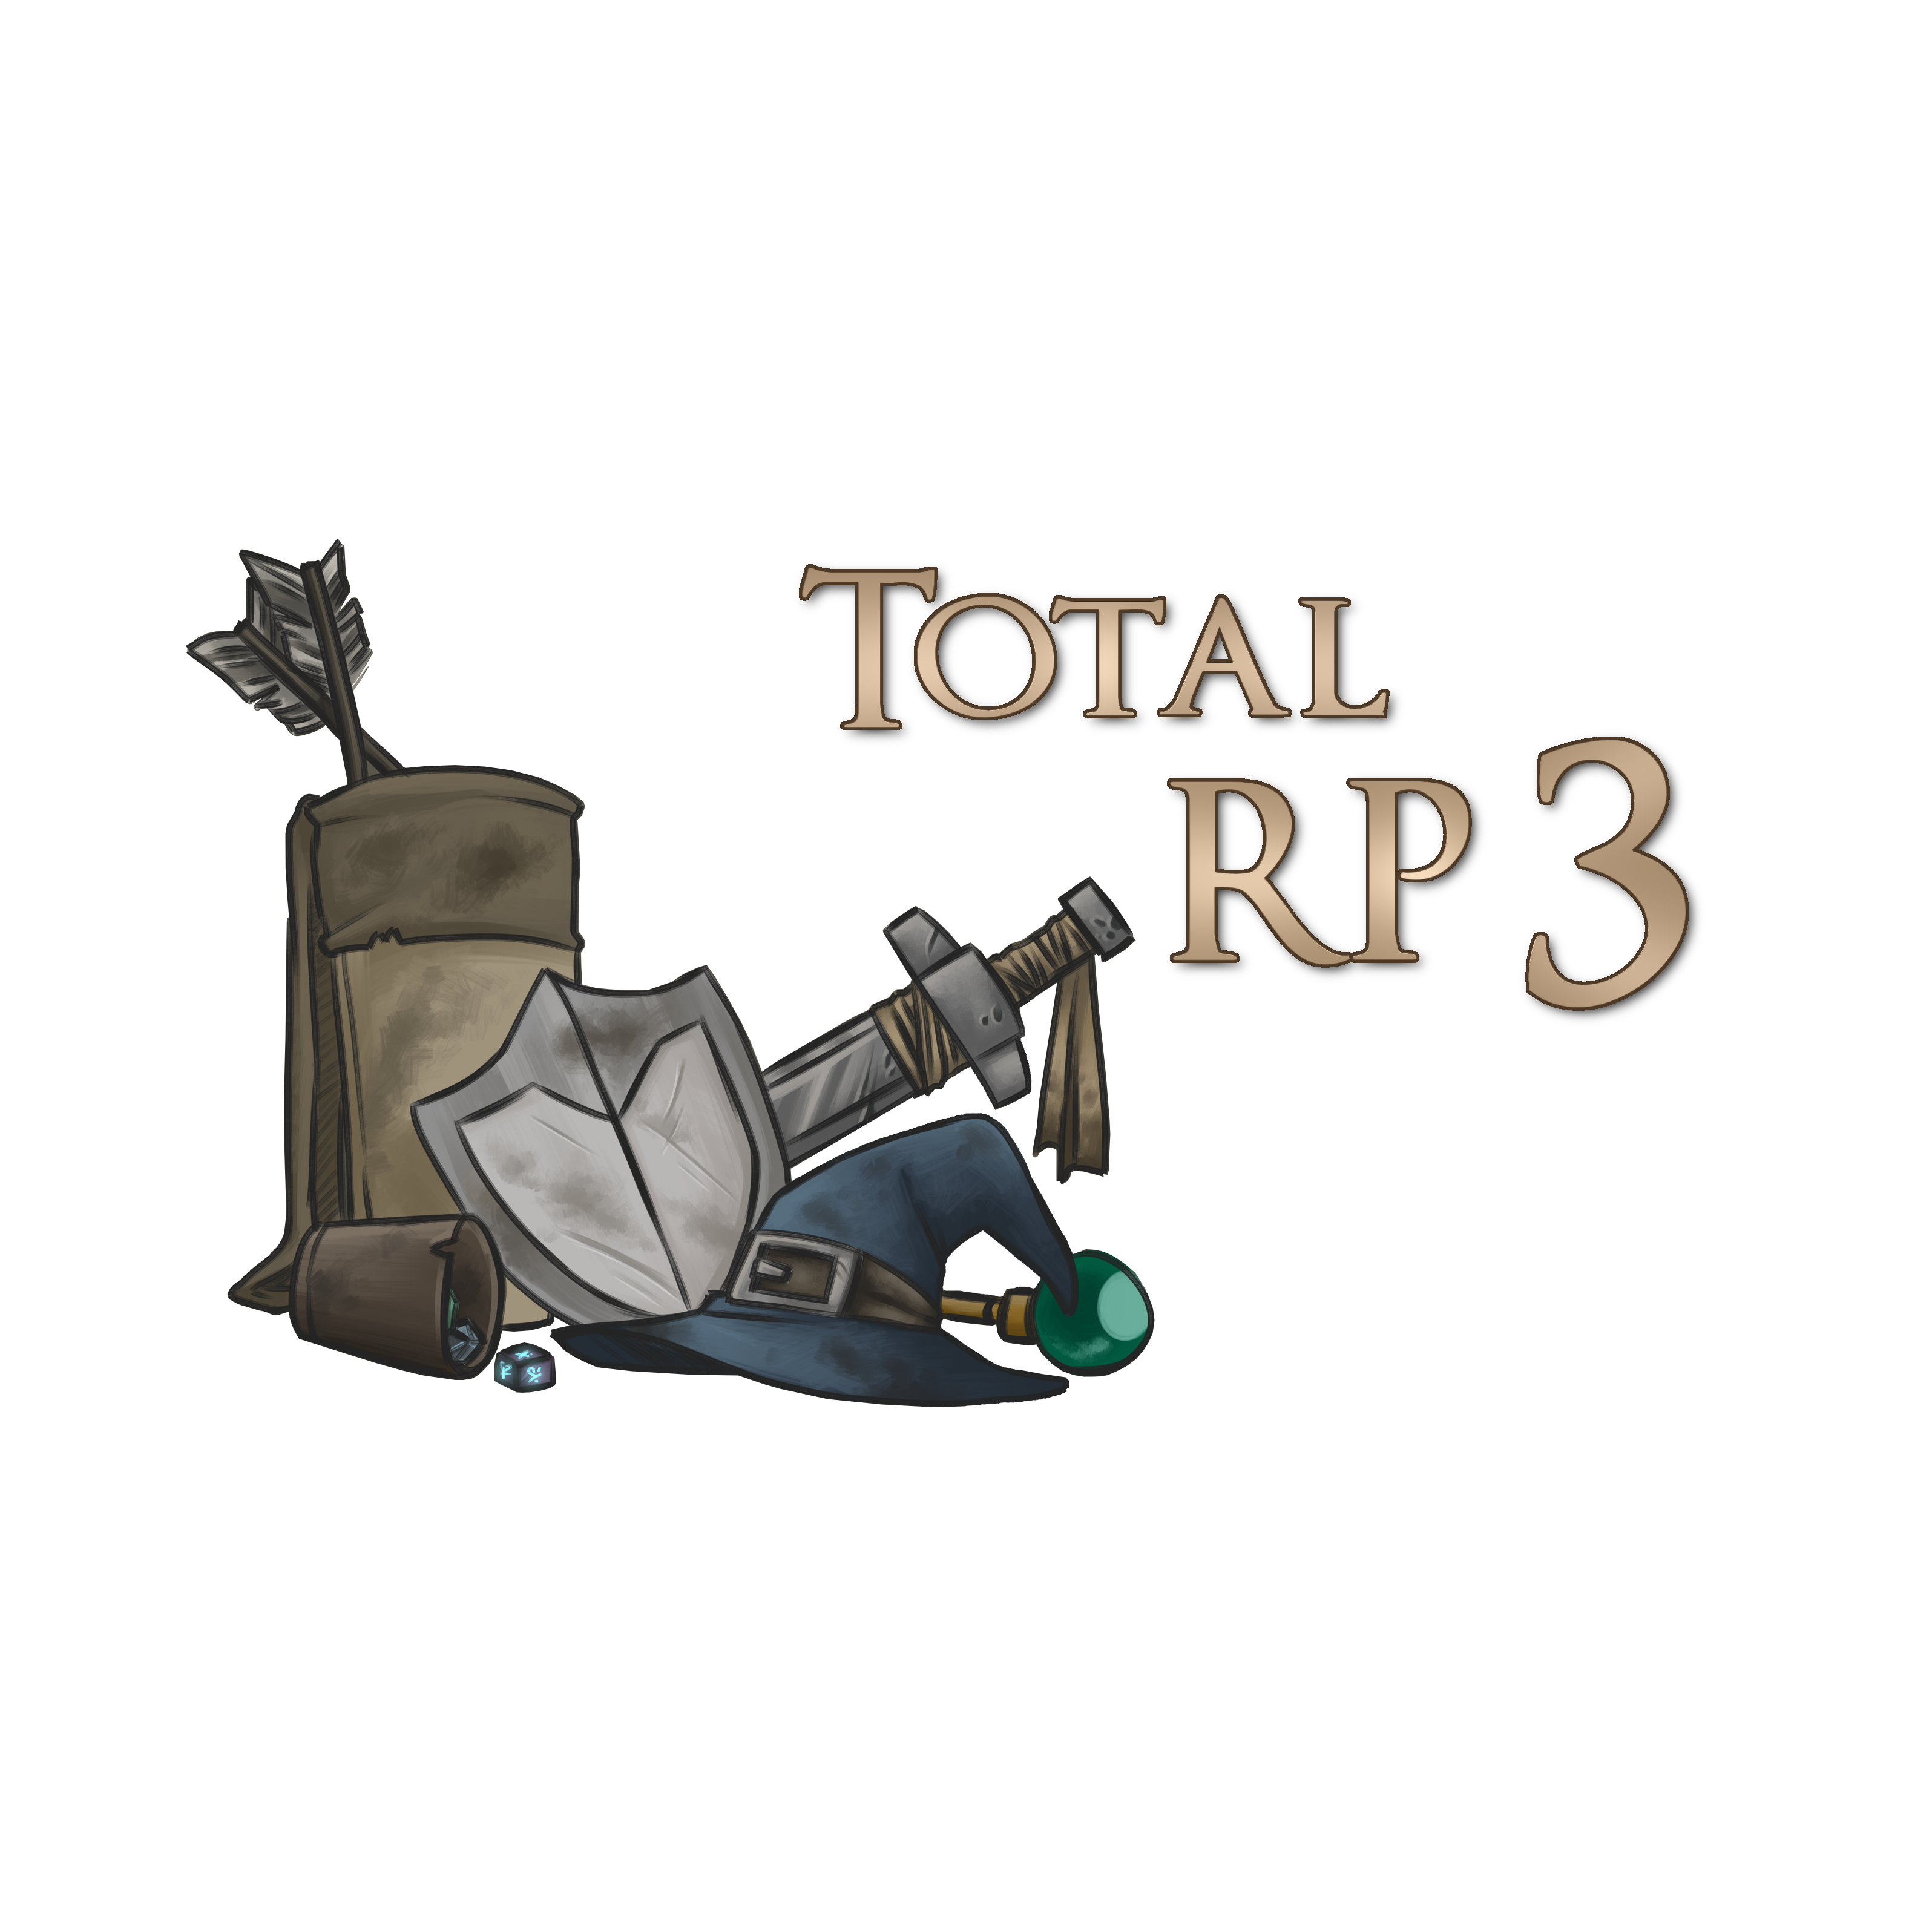 Total RP 3 project avatar